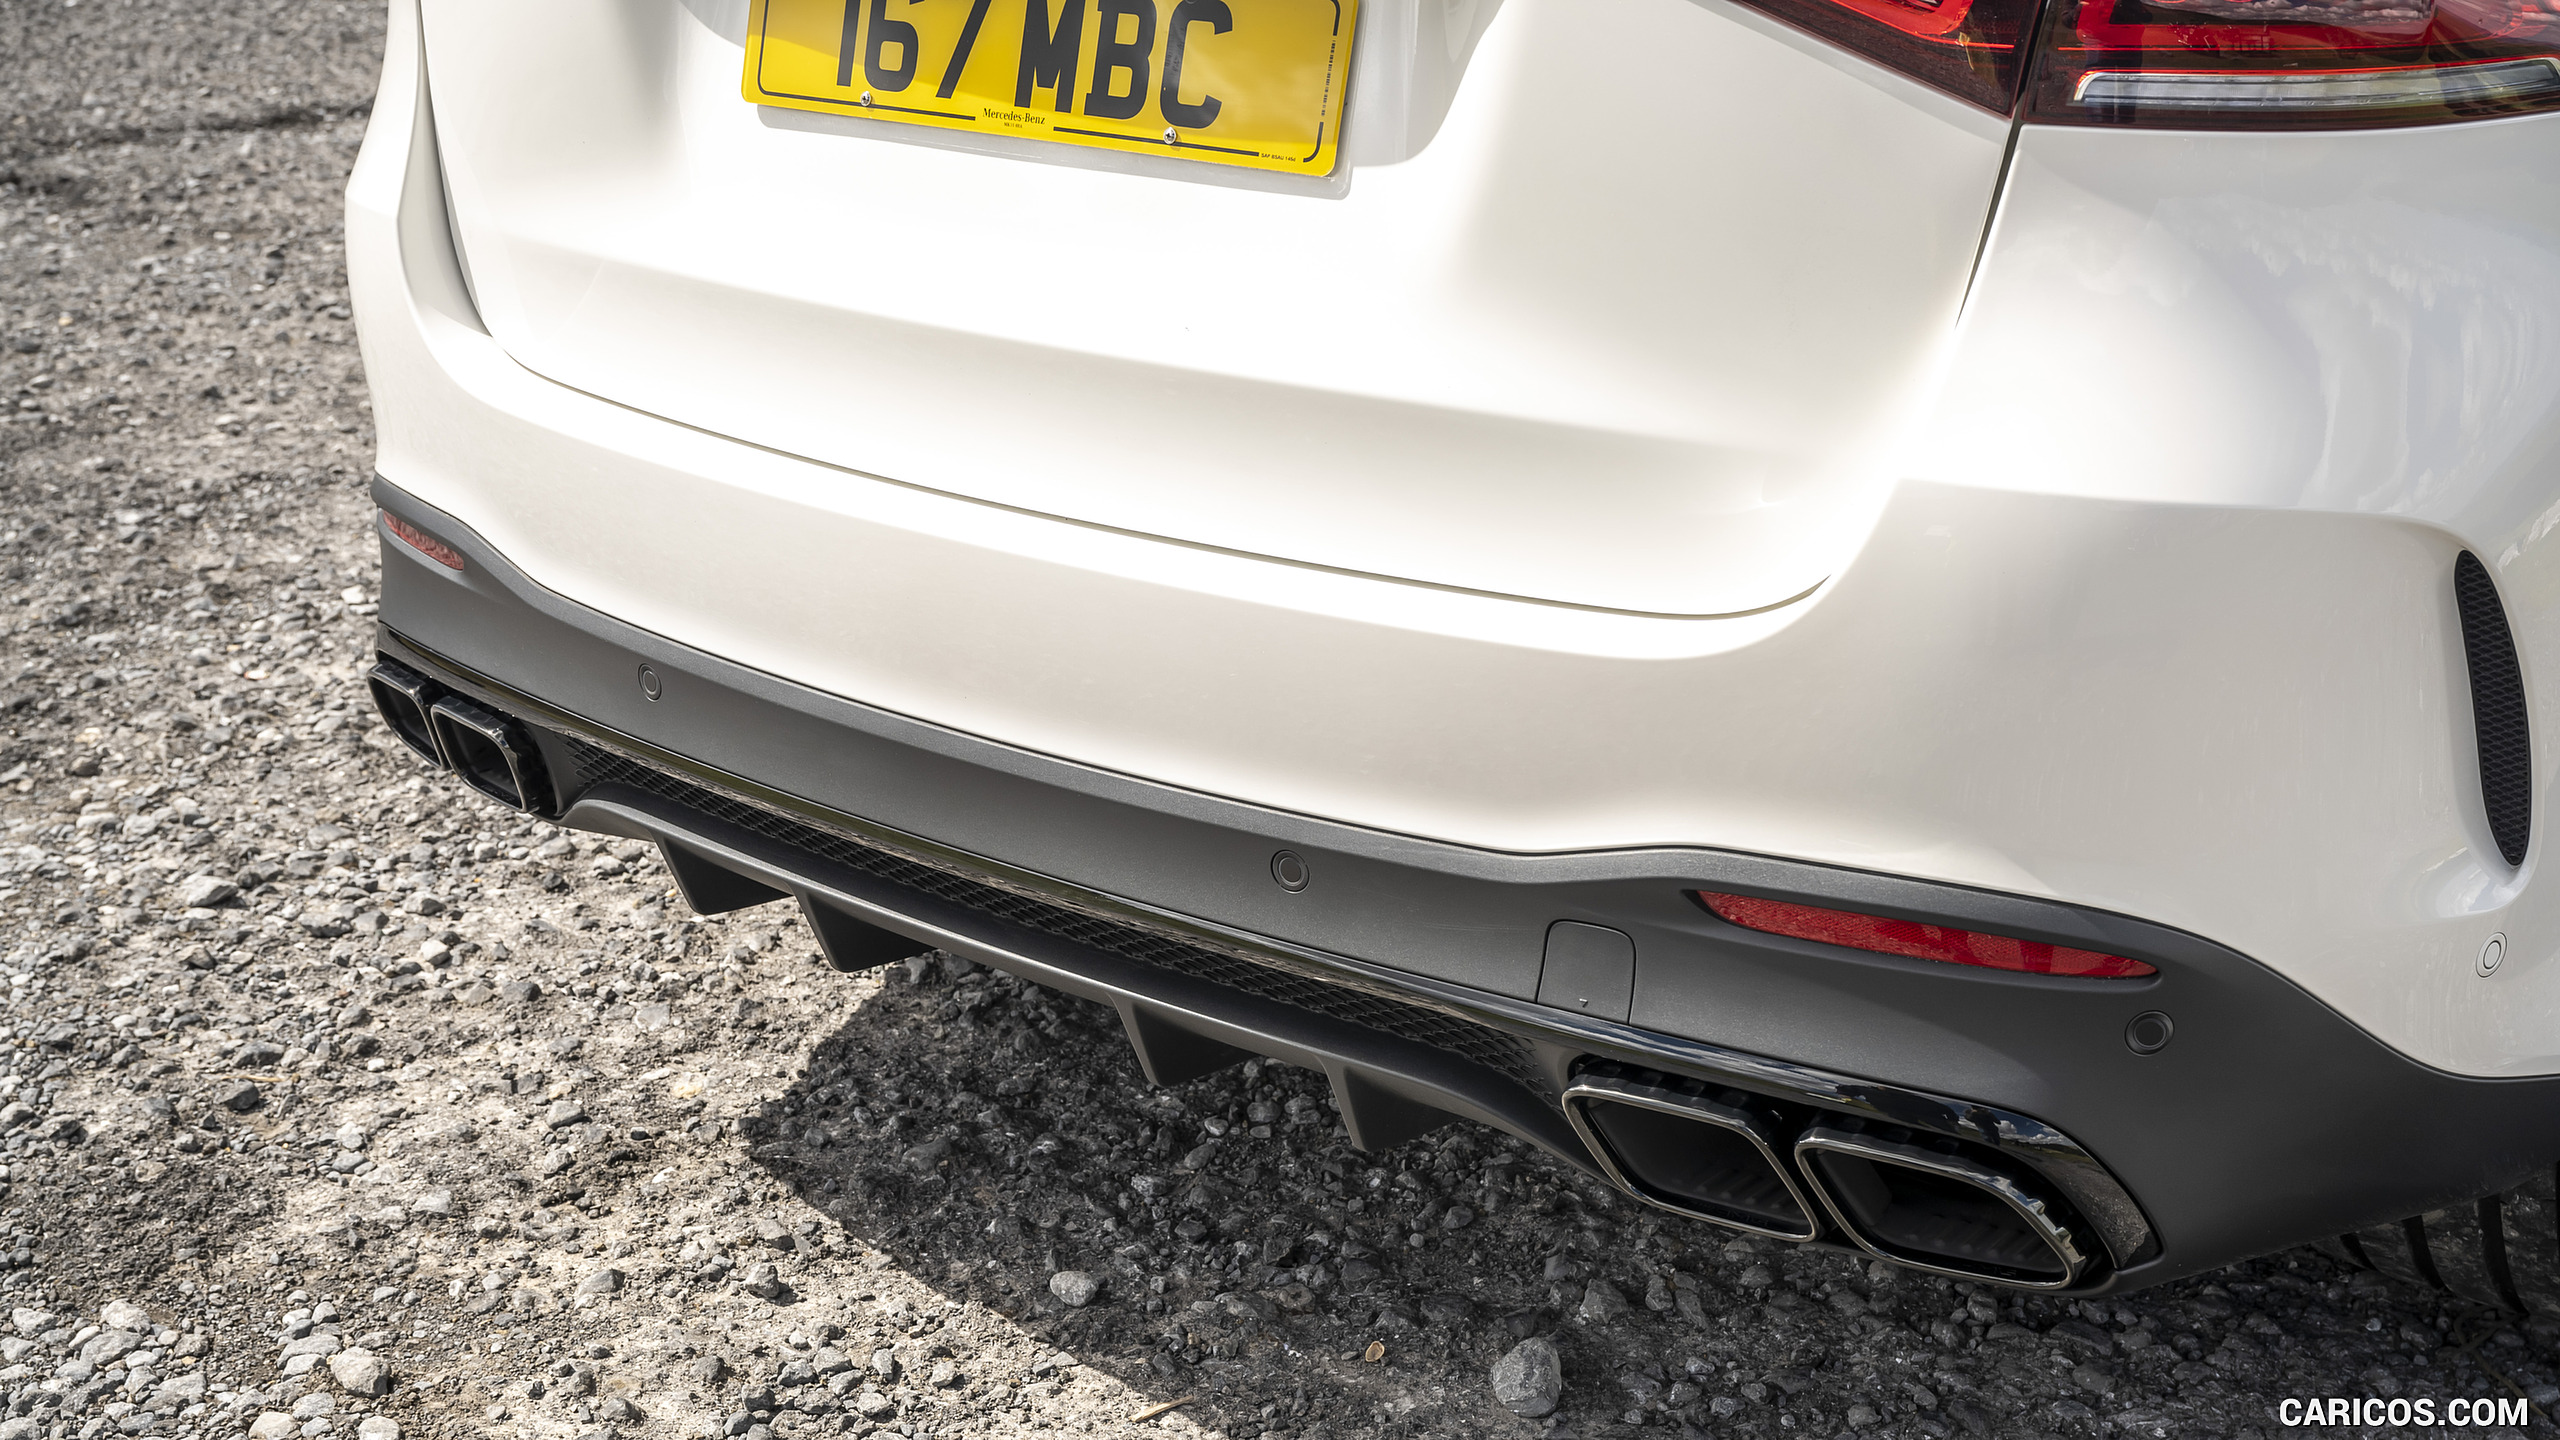 2021 Mercedes-AMG GLE 63 S 4MATIC (UK-Spec) - Exhaust, #157 of 187